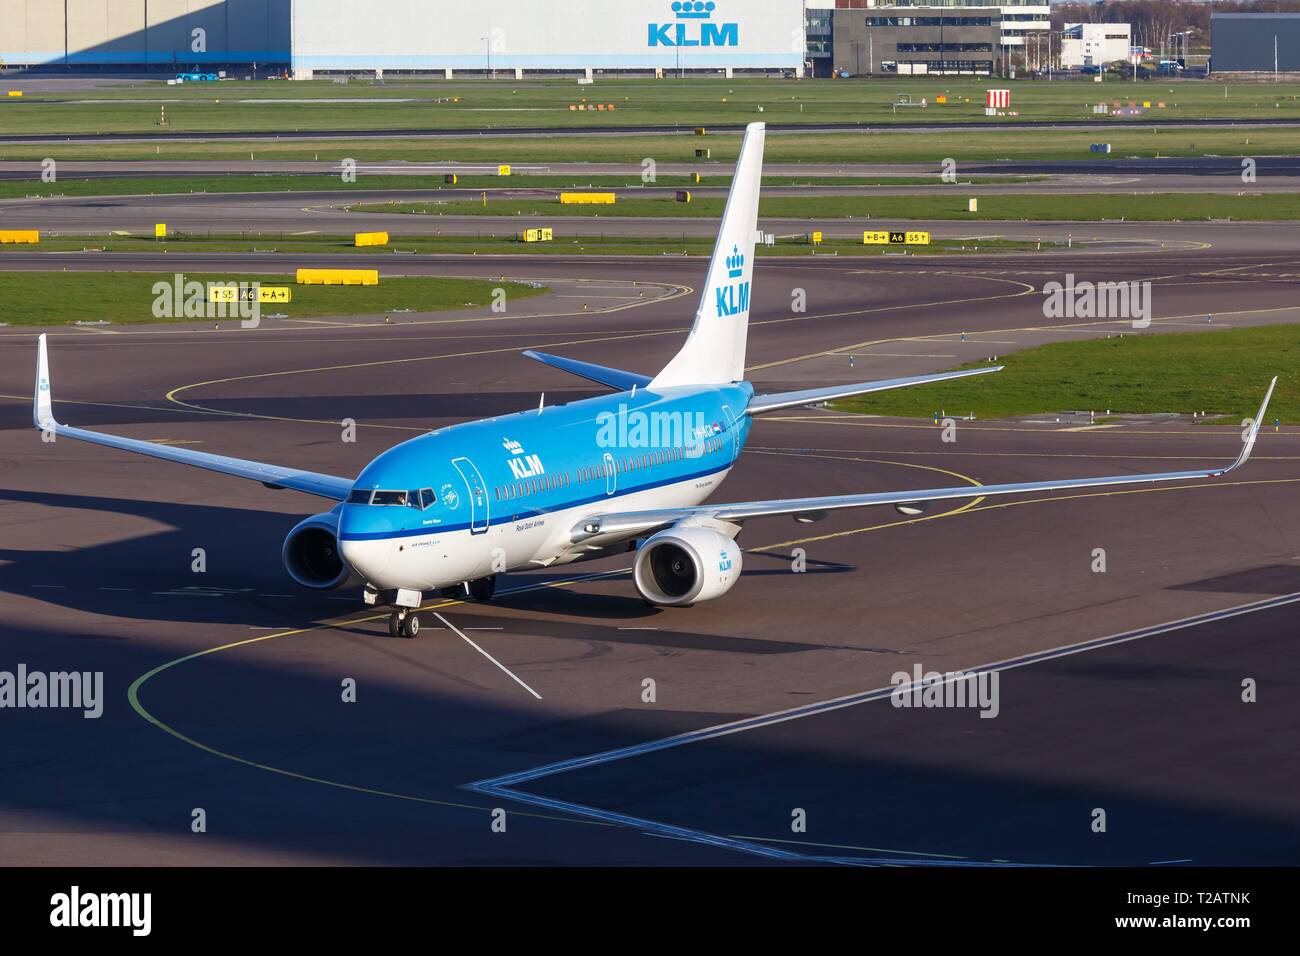 Amsterdam, Netherlands – April 19, 2015: KLM Royal Dutch Airlines Boeing 737-700 airplane at Amsterdam Schiphol Airport (AMS) in the Netherlands. | usage worldwide Stock Photo